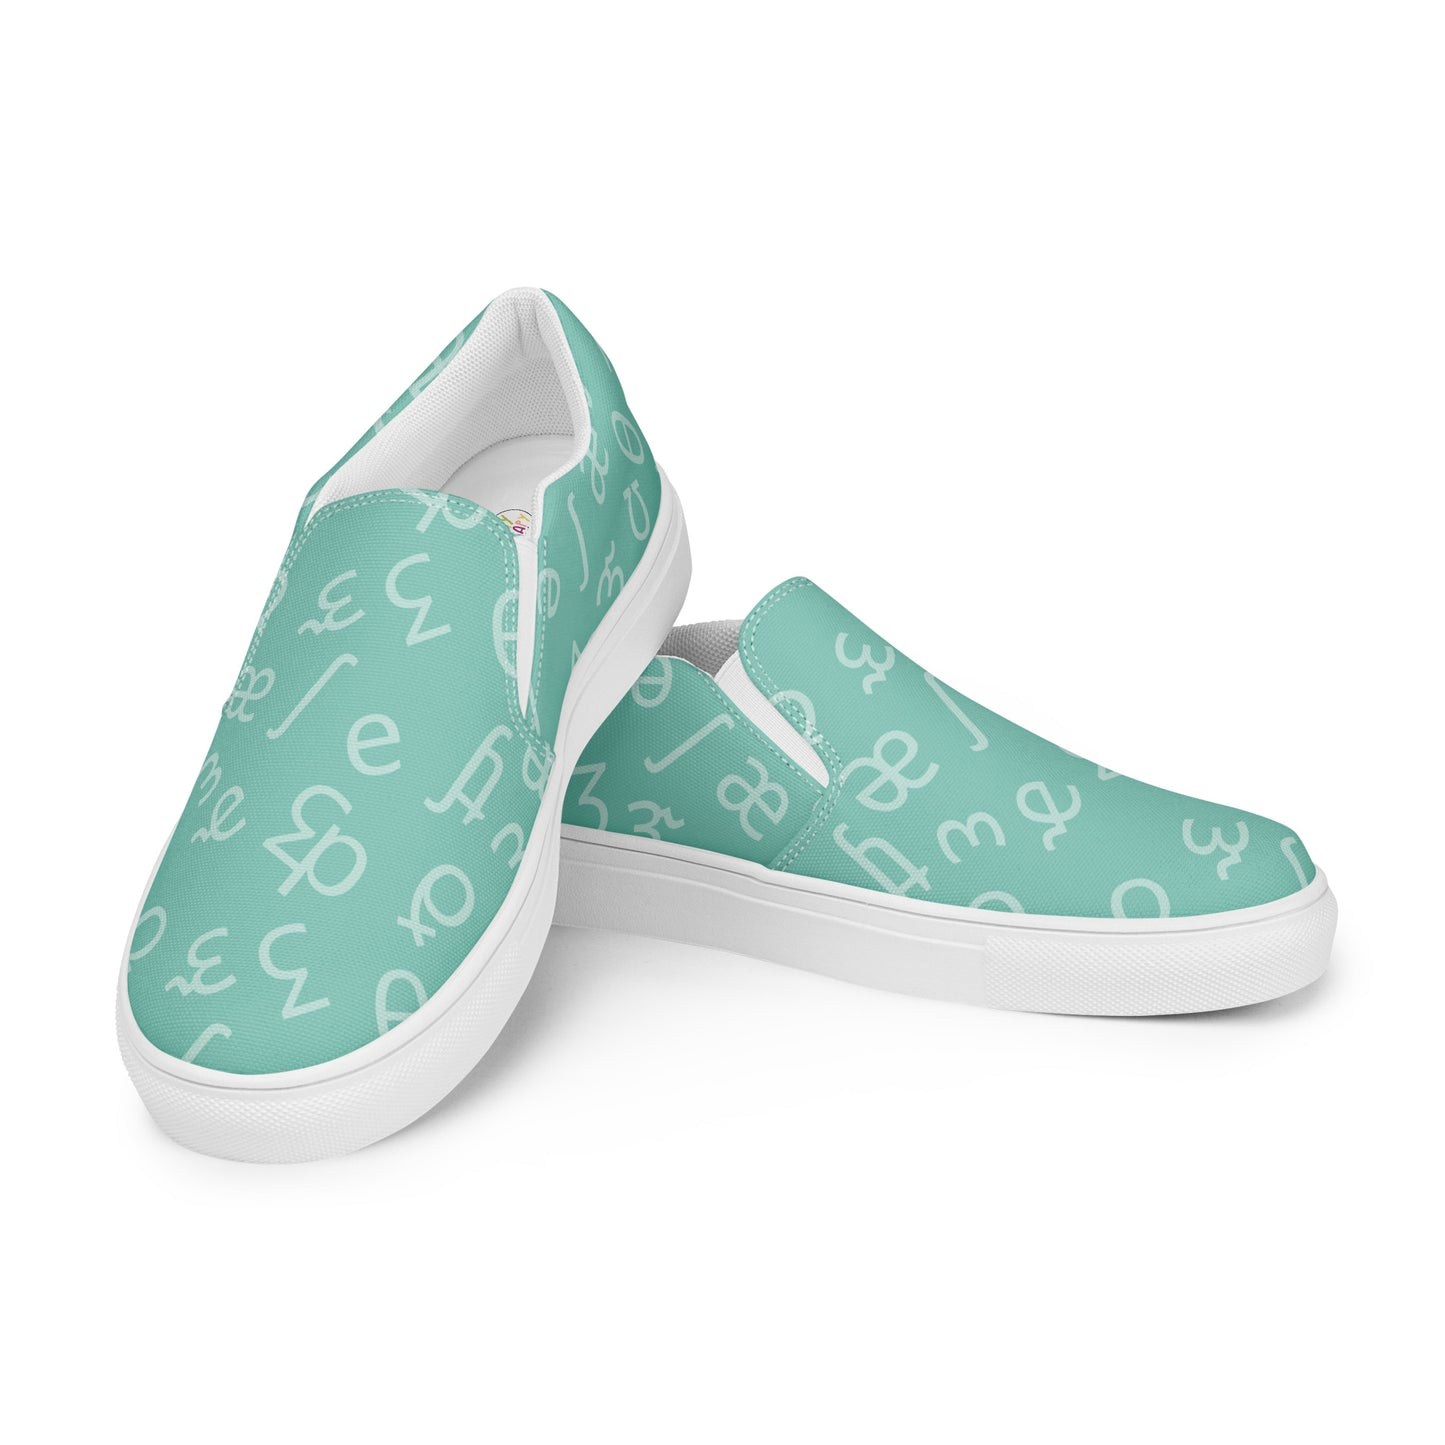 Mint IPA Slip-on Canvas Shoes (Women's Sizes)